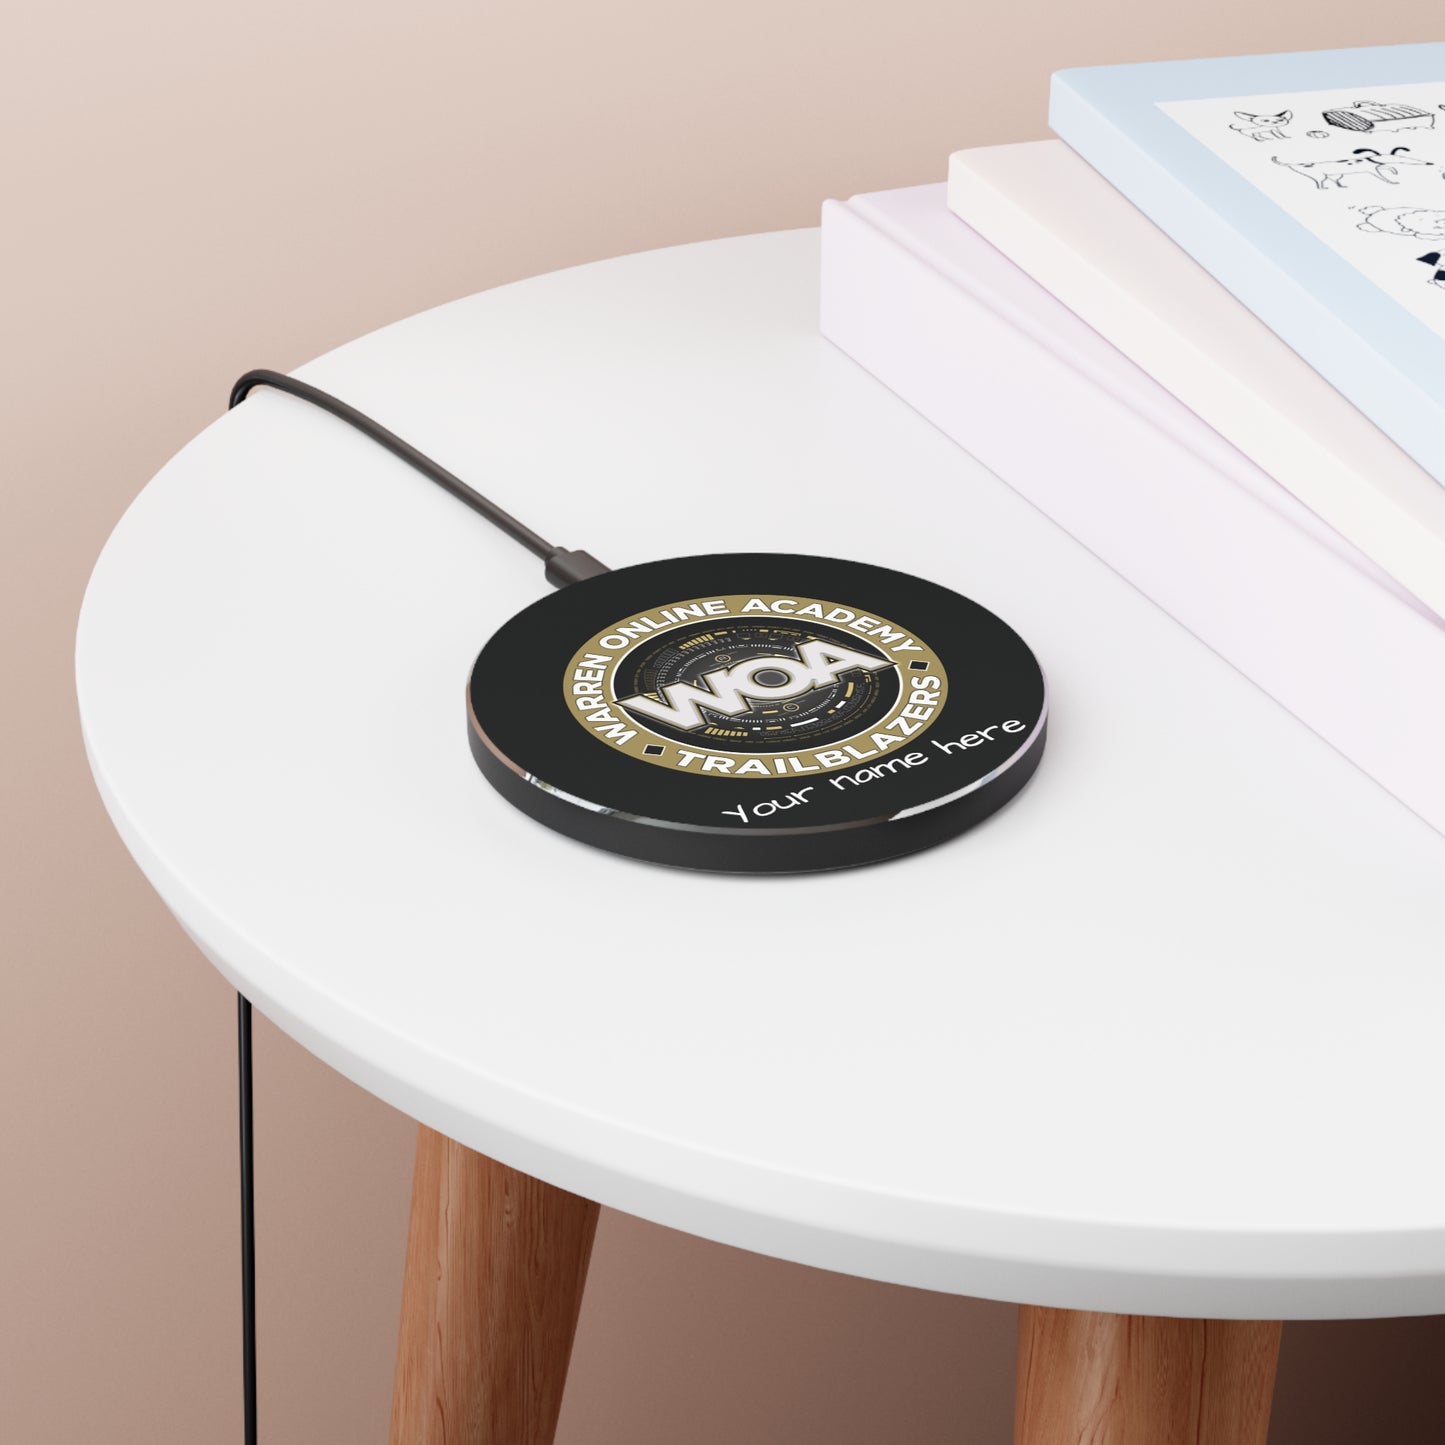 WOA Personalized Wireless Charger with LED Lights | FREE SHIPPING!